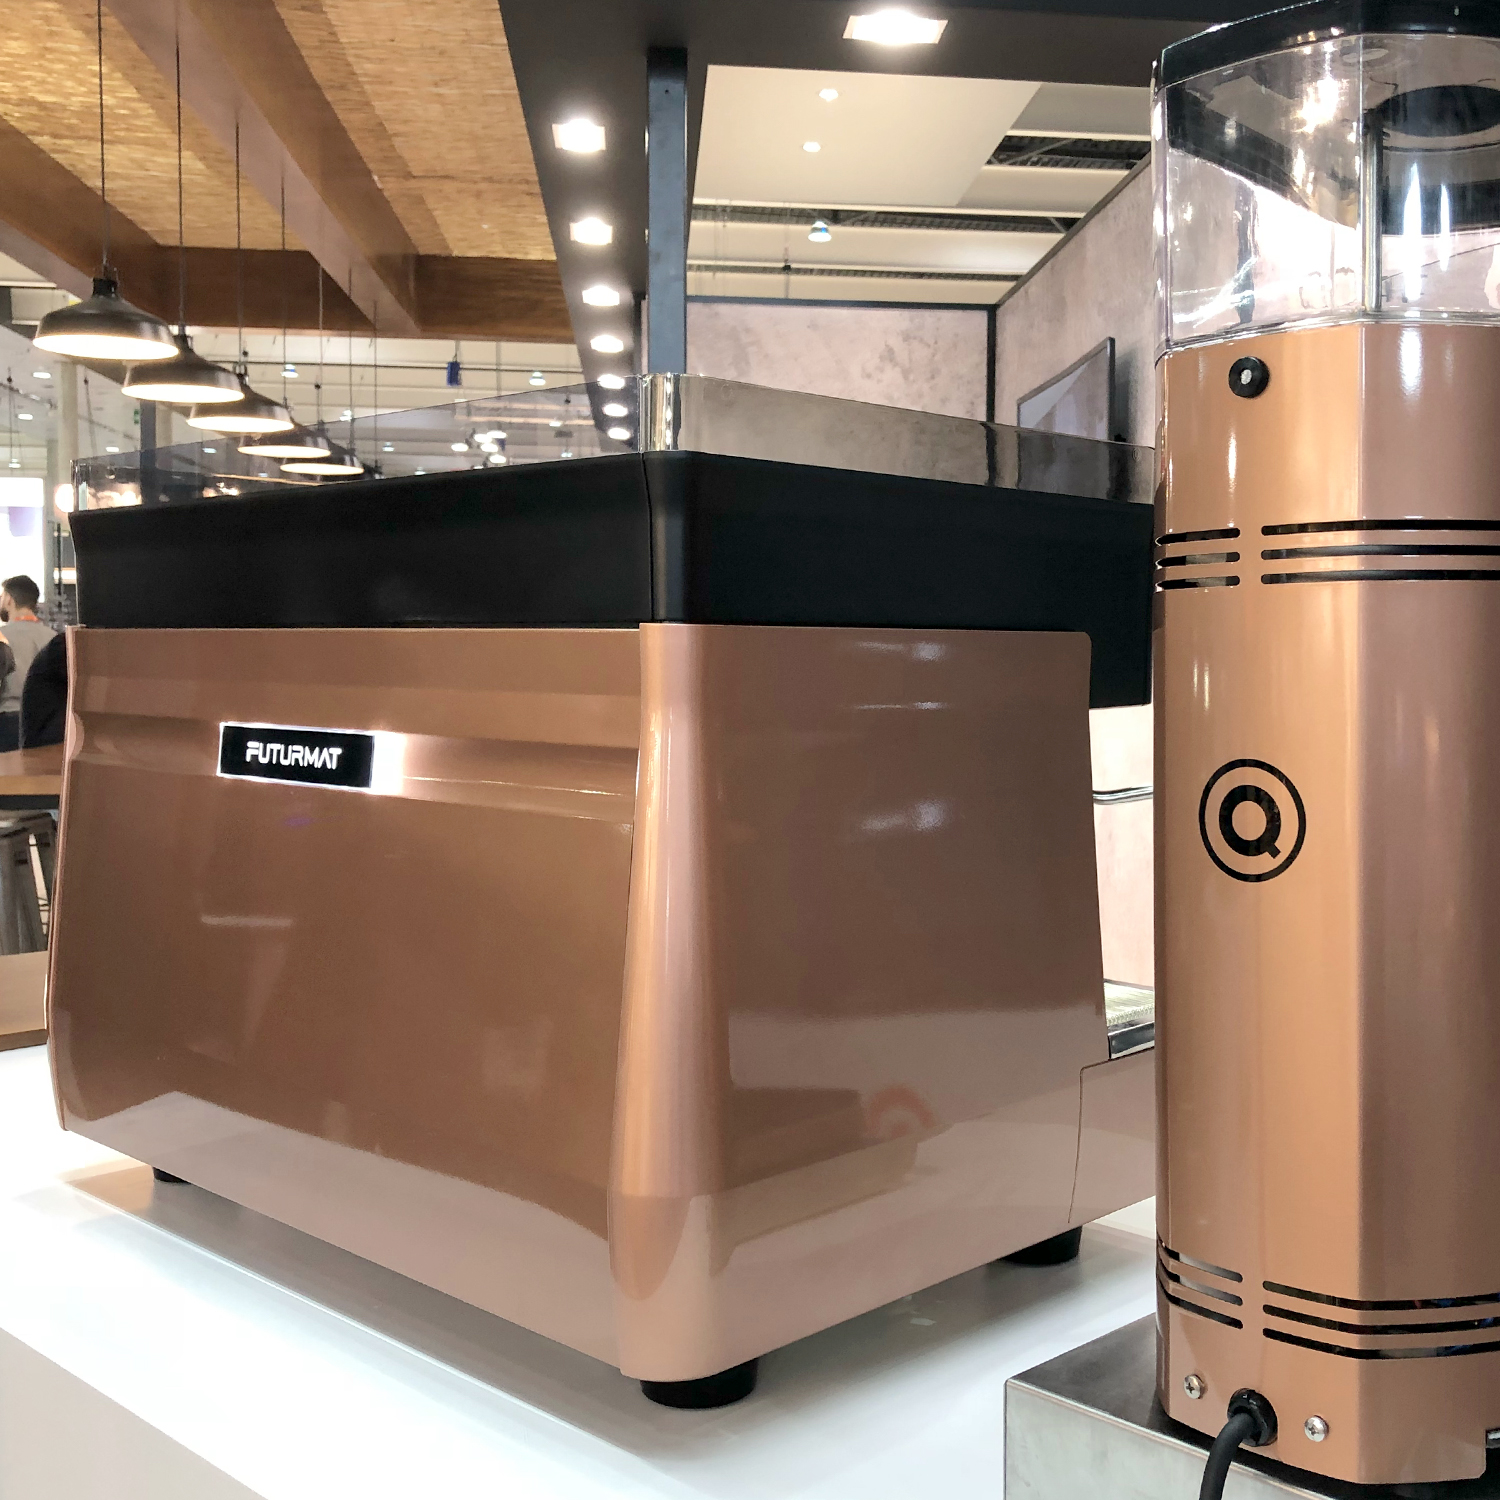 Quality Espresso Futurmat F3 was presented ad Hostelco 2018 with our design